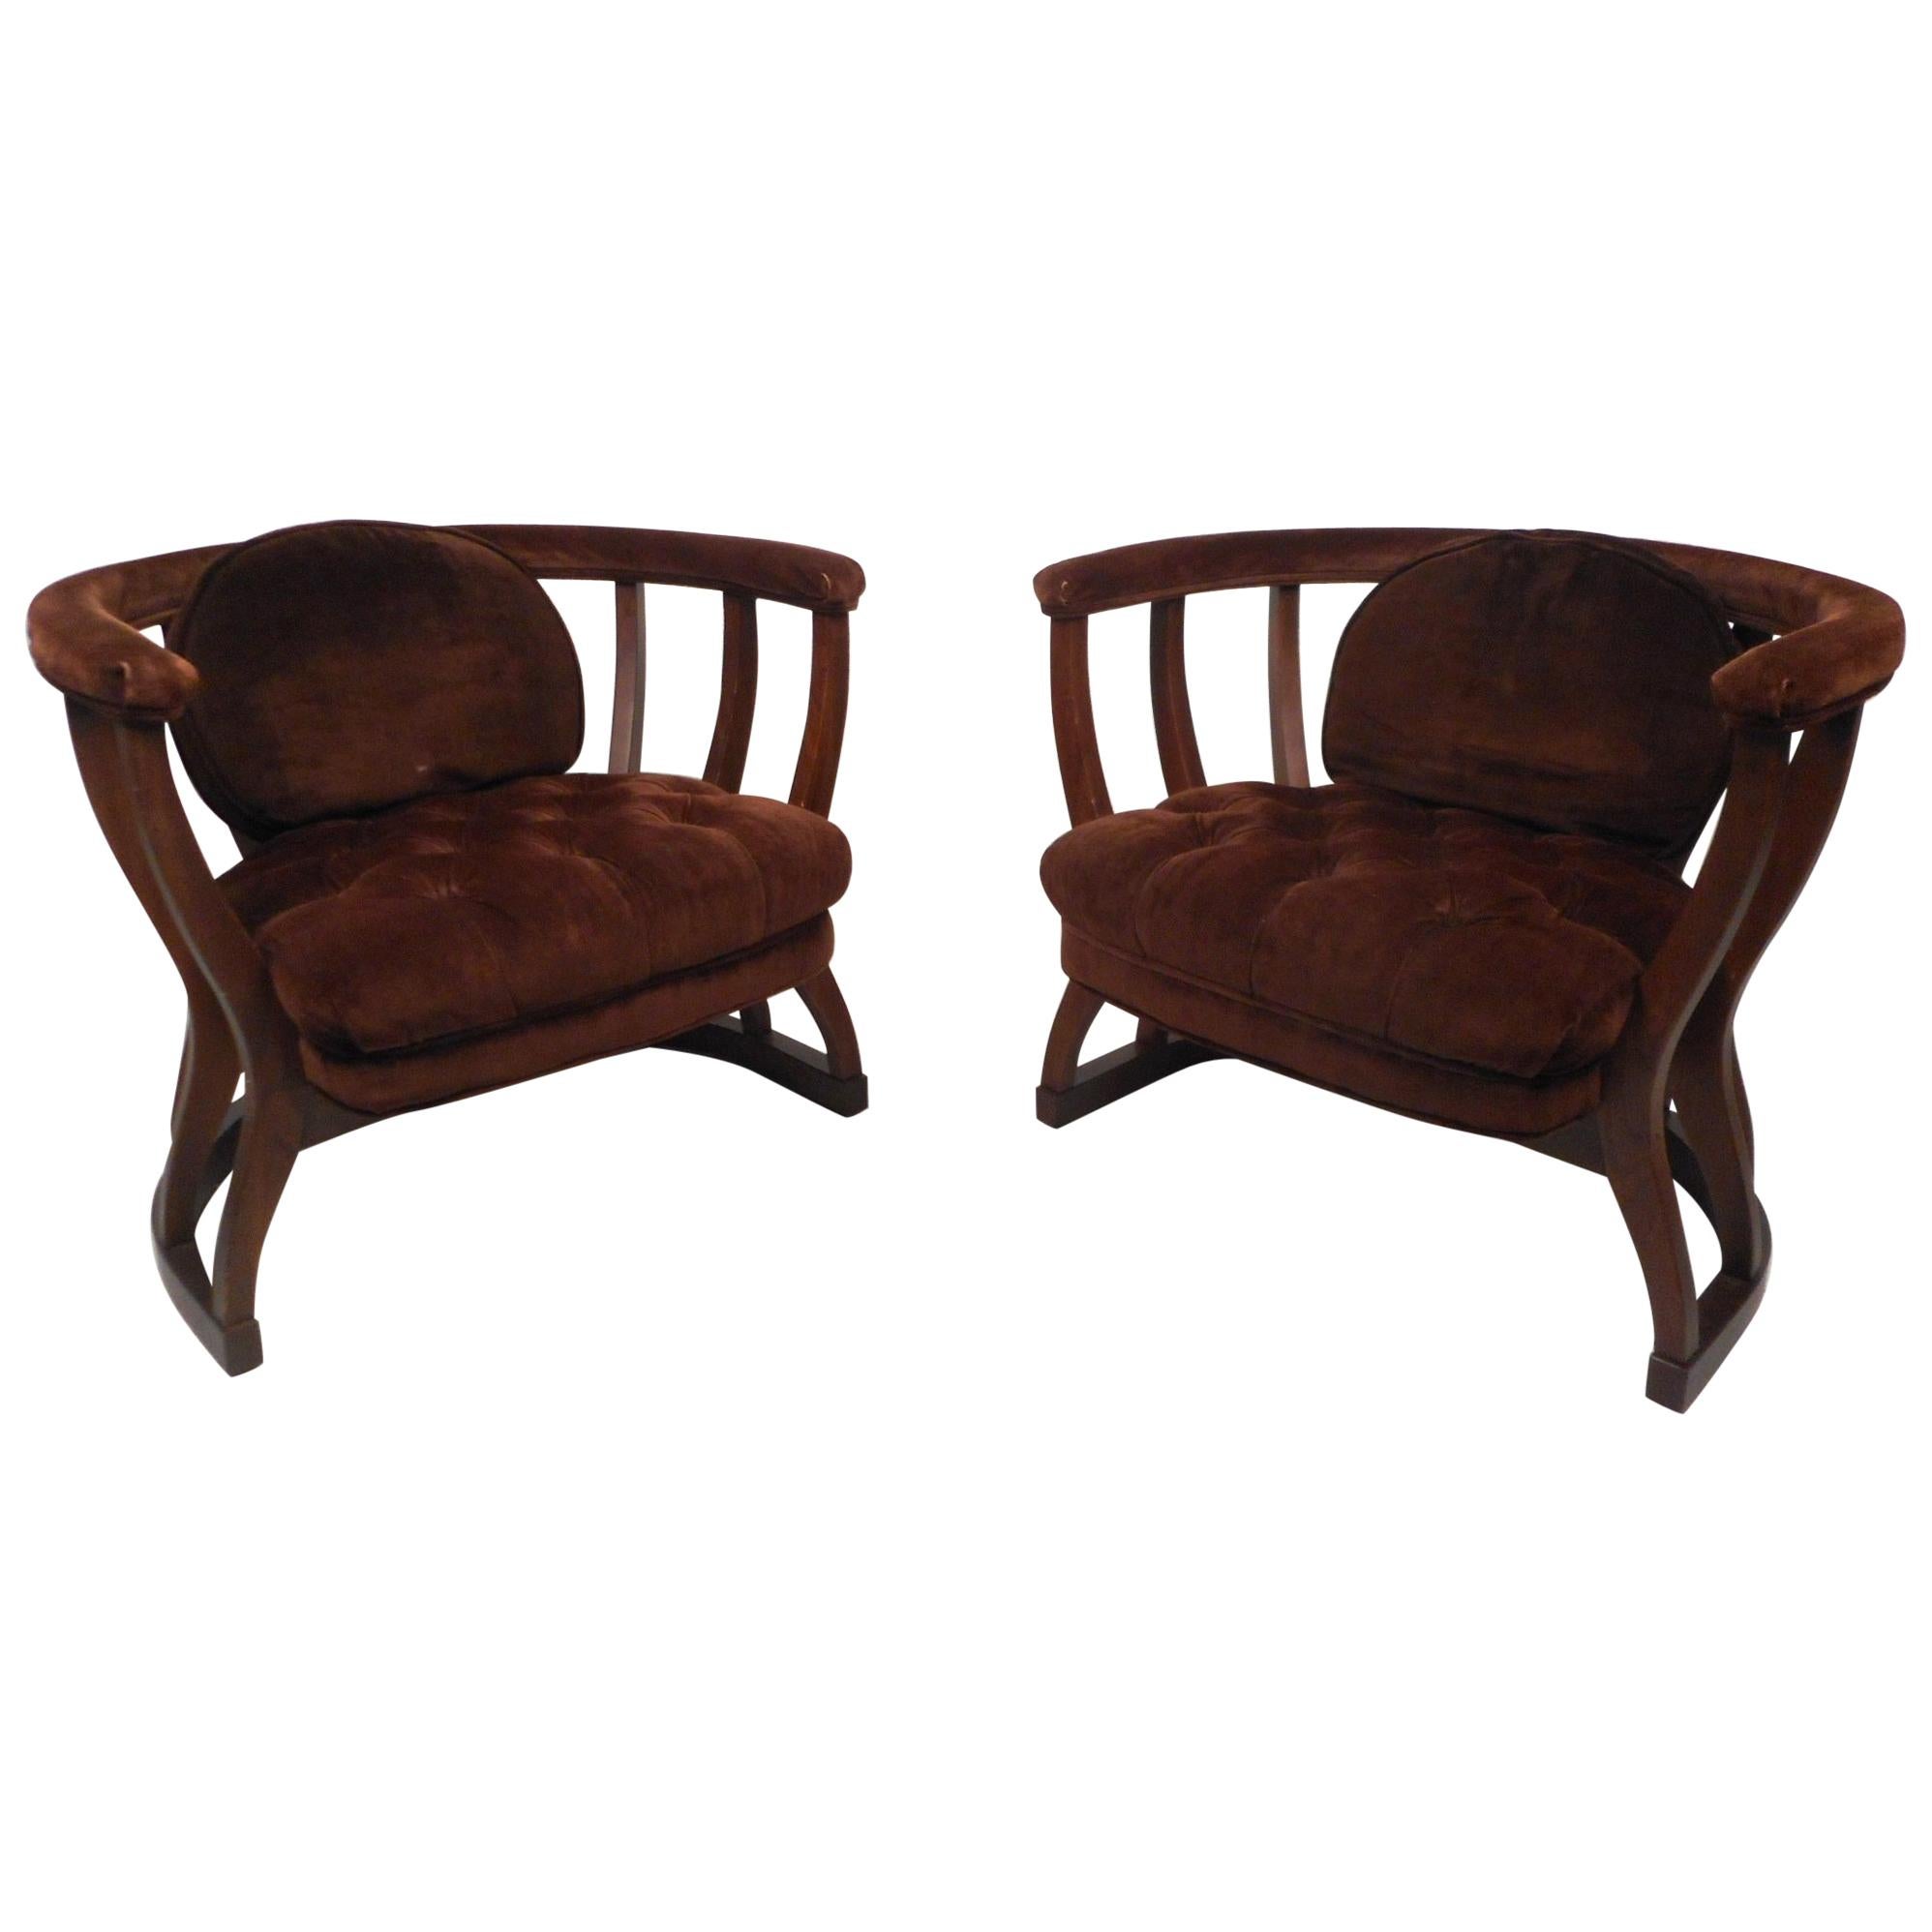 Pair of Mid-Century Modern Upholstered Barrel Back Chairs